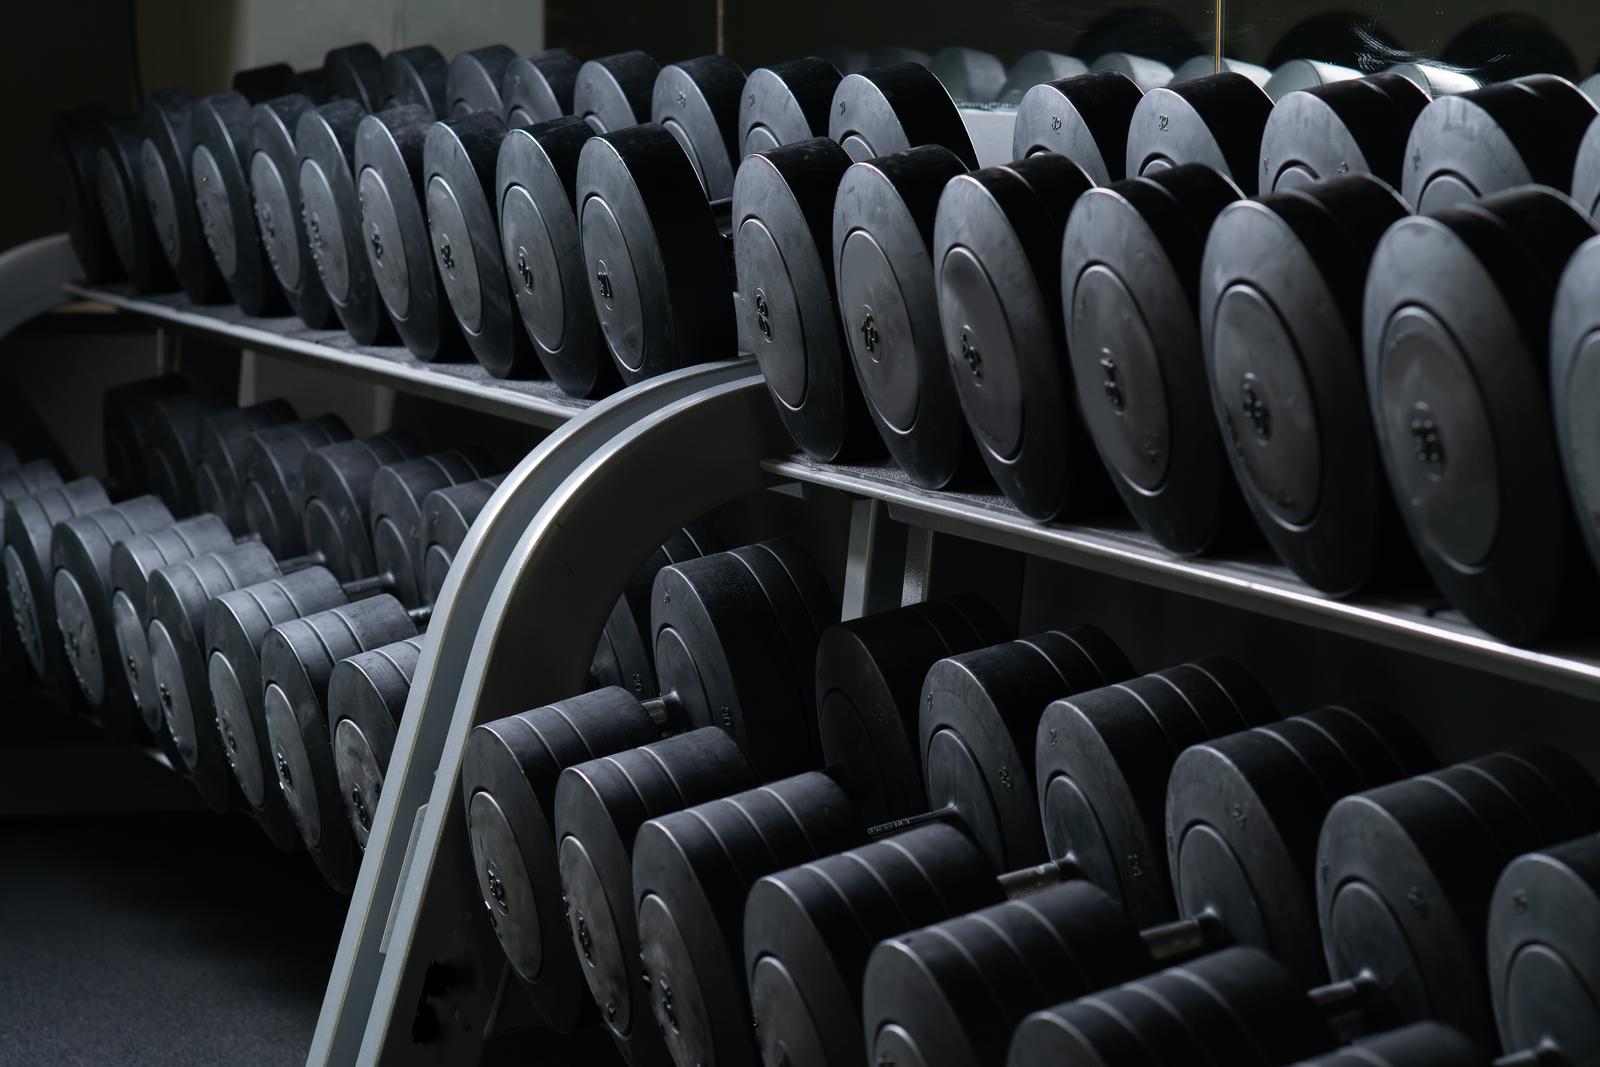 Gym storage solutions weight plates